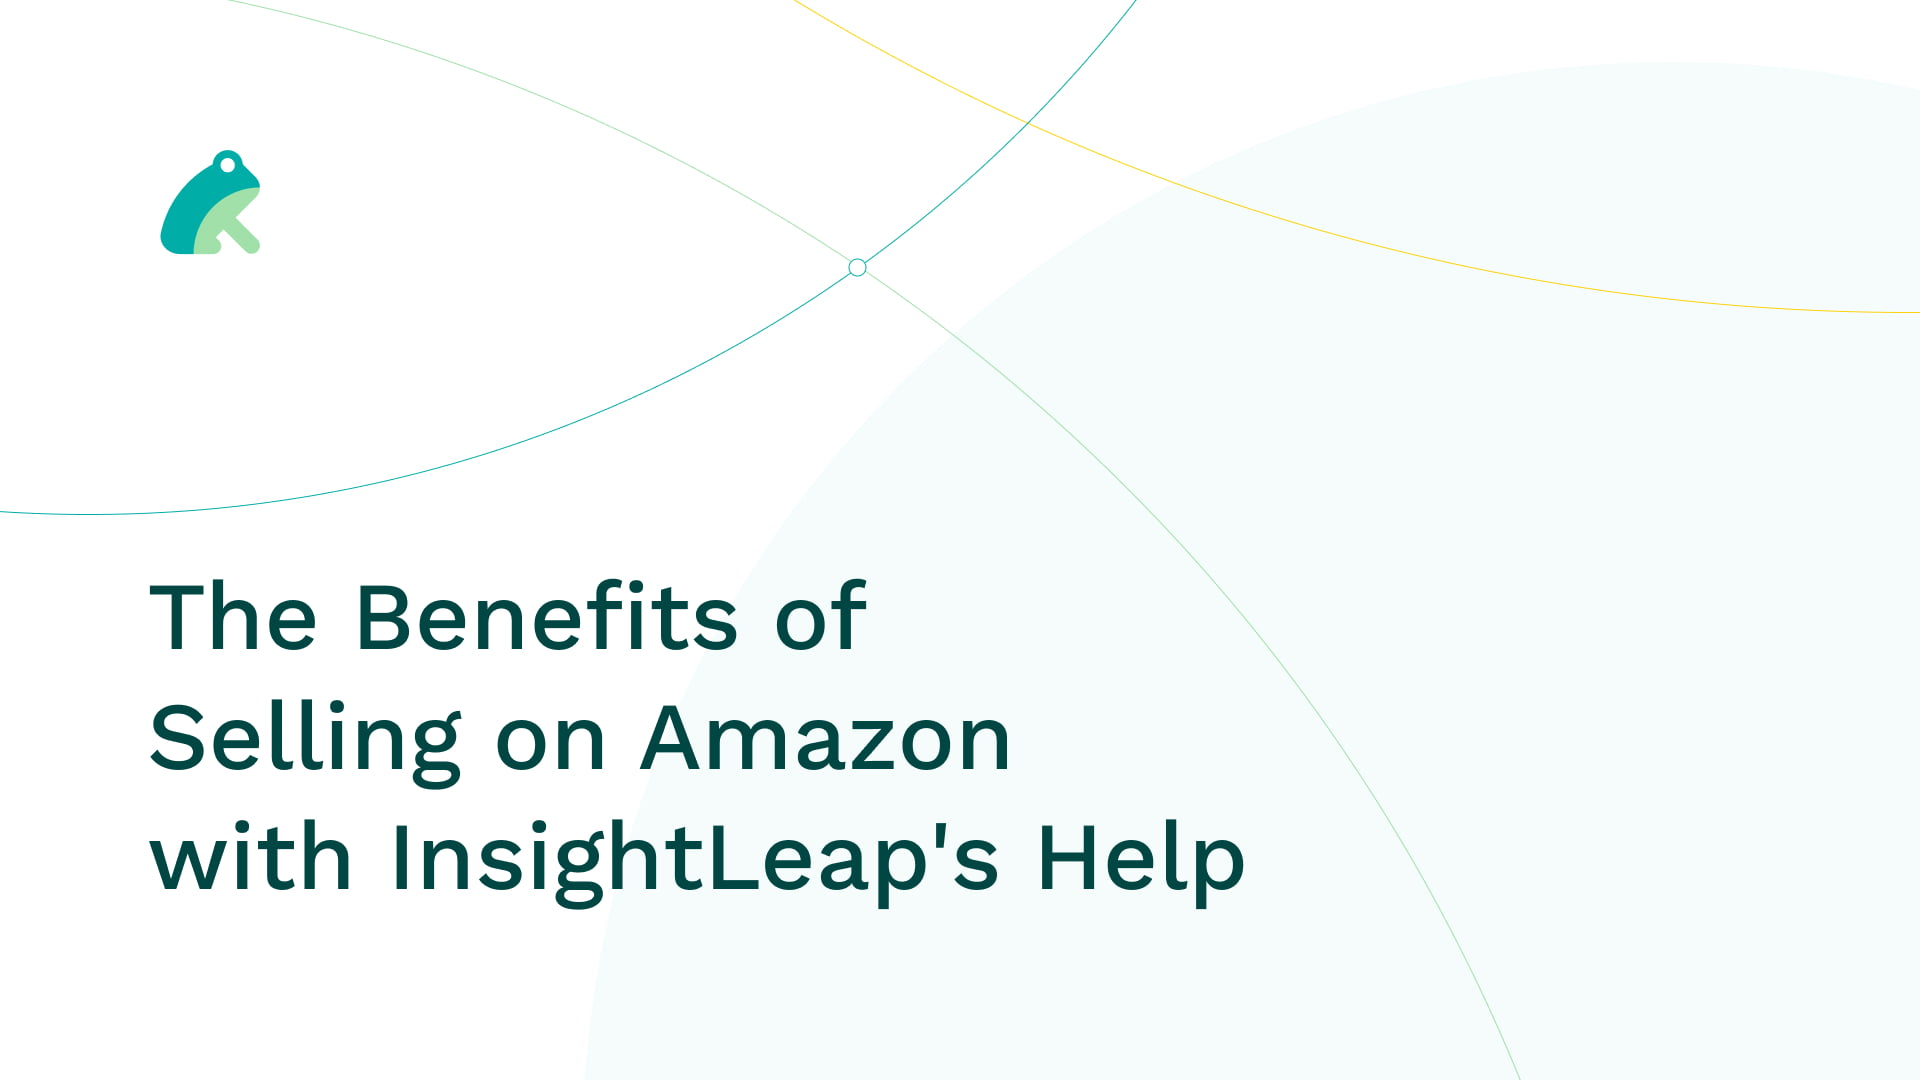 The Benefits of Selling on Amazon with InsightLeap's Help